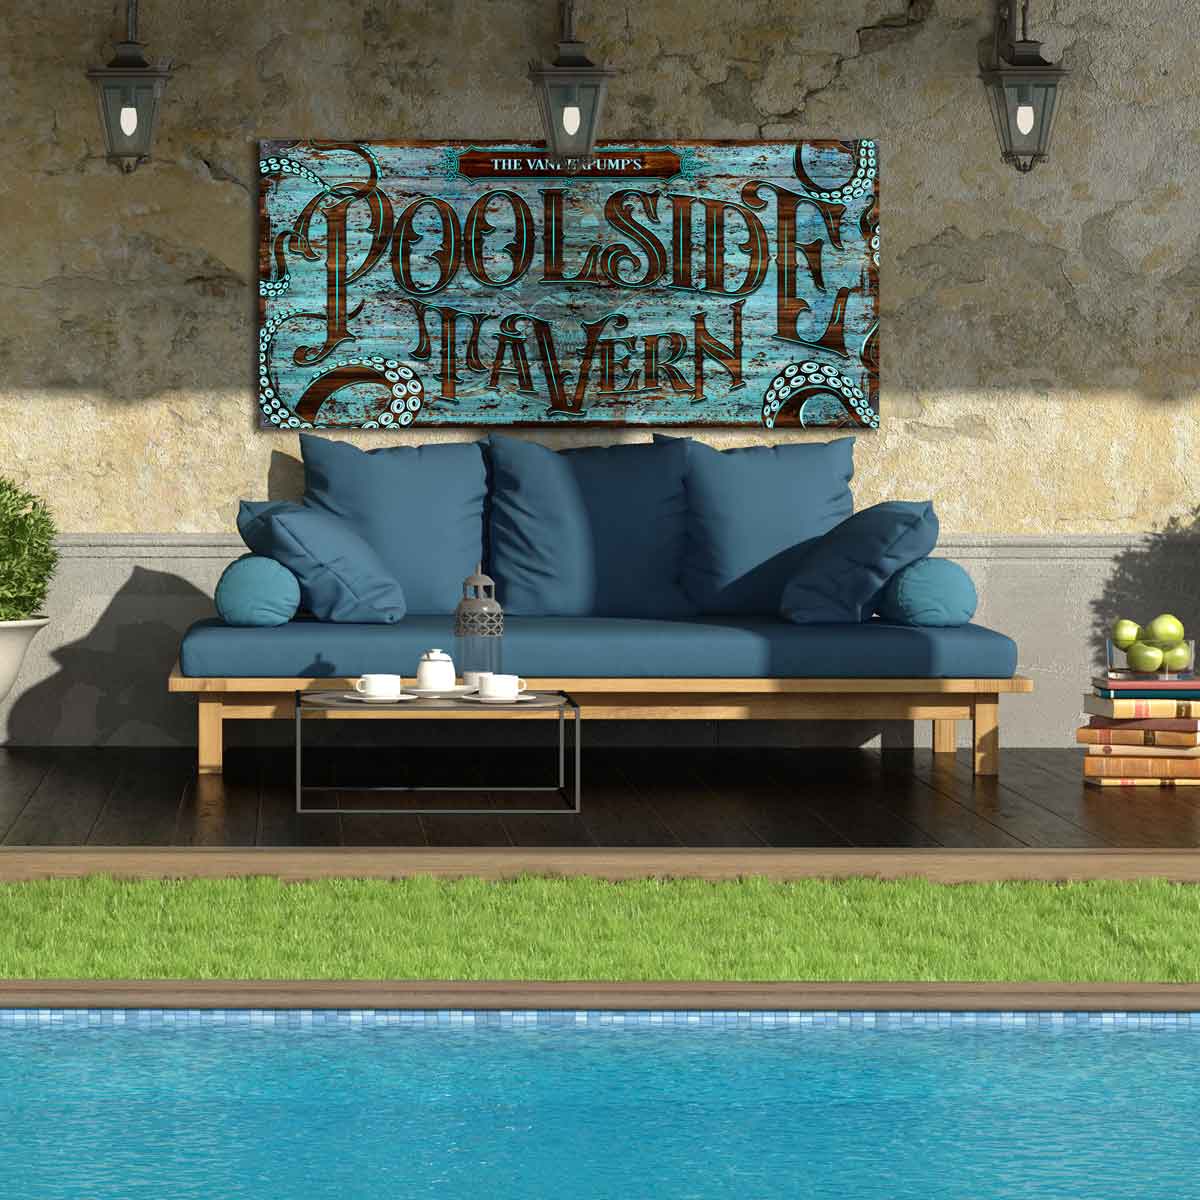 Pool Signs - Patina Poolside Tavern Sign